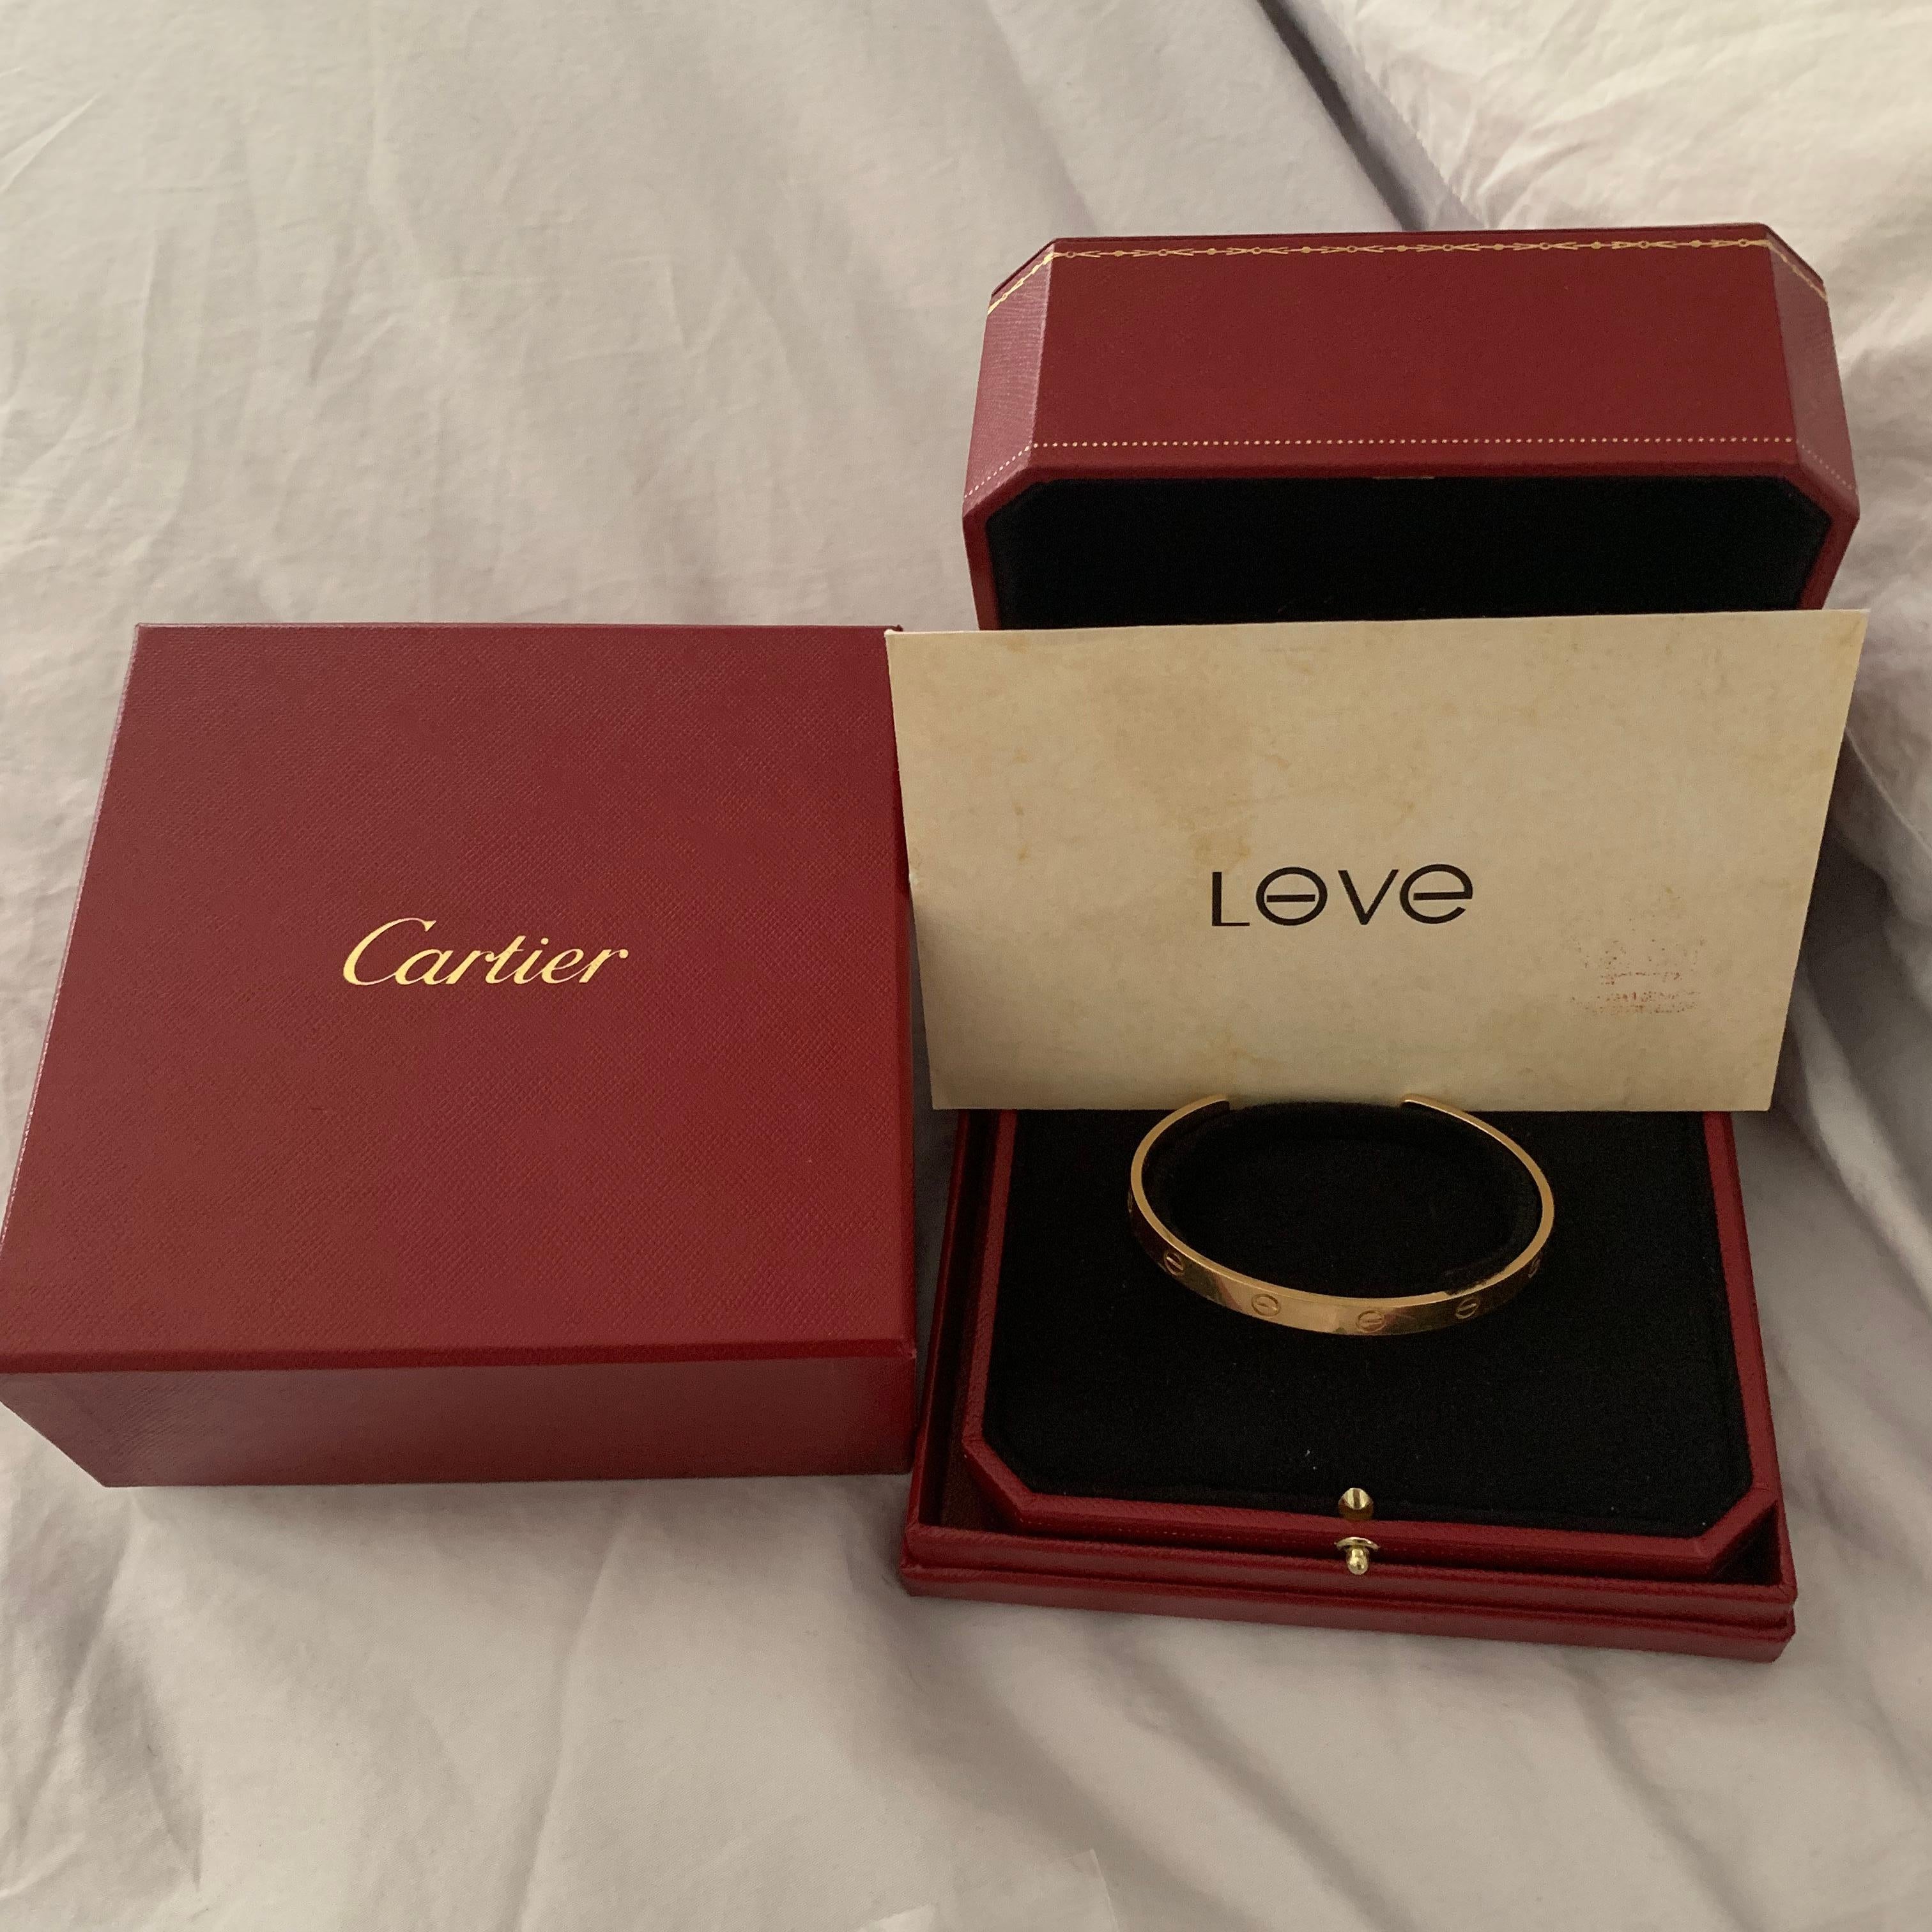 We take trades for certain diamonds , watches, and designer jewelry.

Cartier Yellow Gold Open Cuff Love Bracelet 2018 Box and Papers Size 19

This Bracelet is in Mint condition.

Comes With Box and Papers

Guaranteed Authentic Cartier
